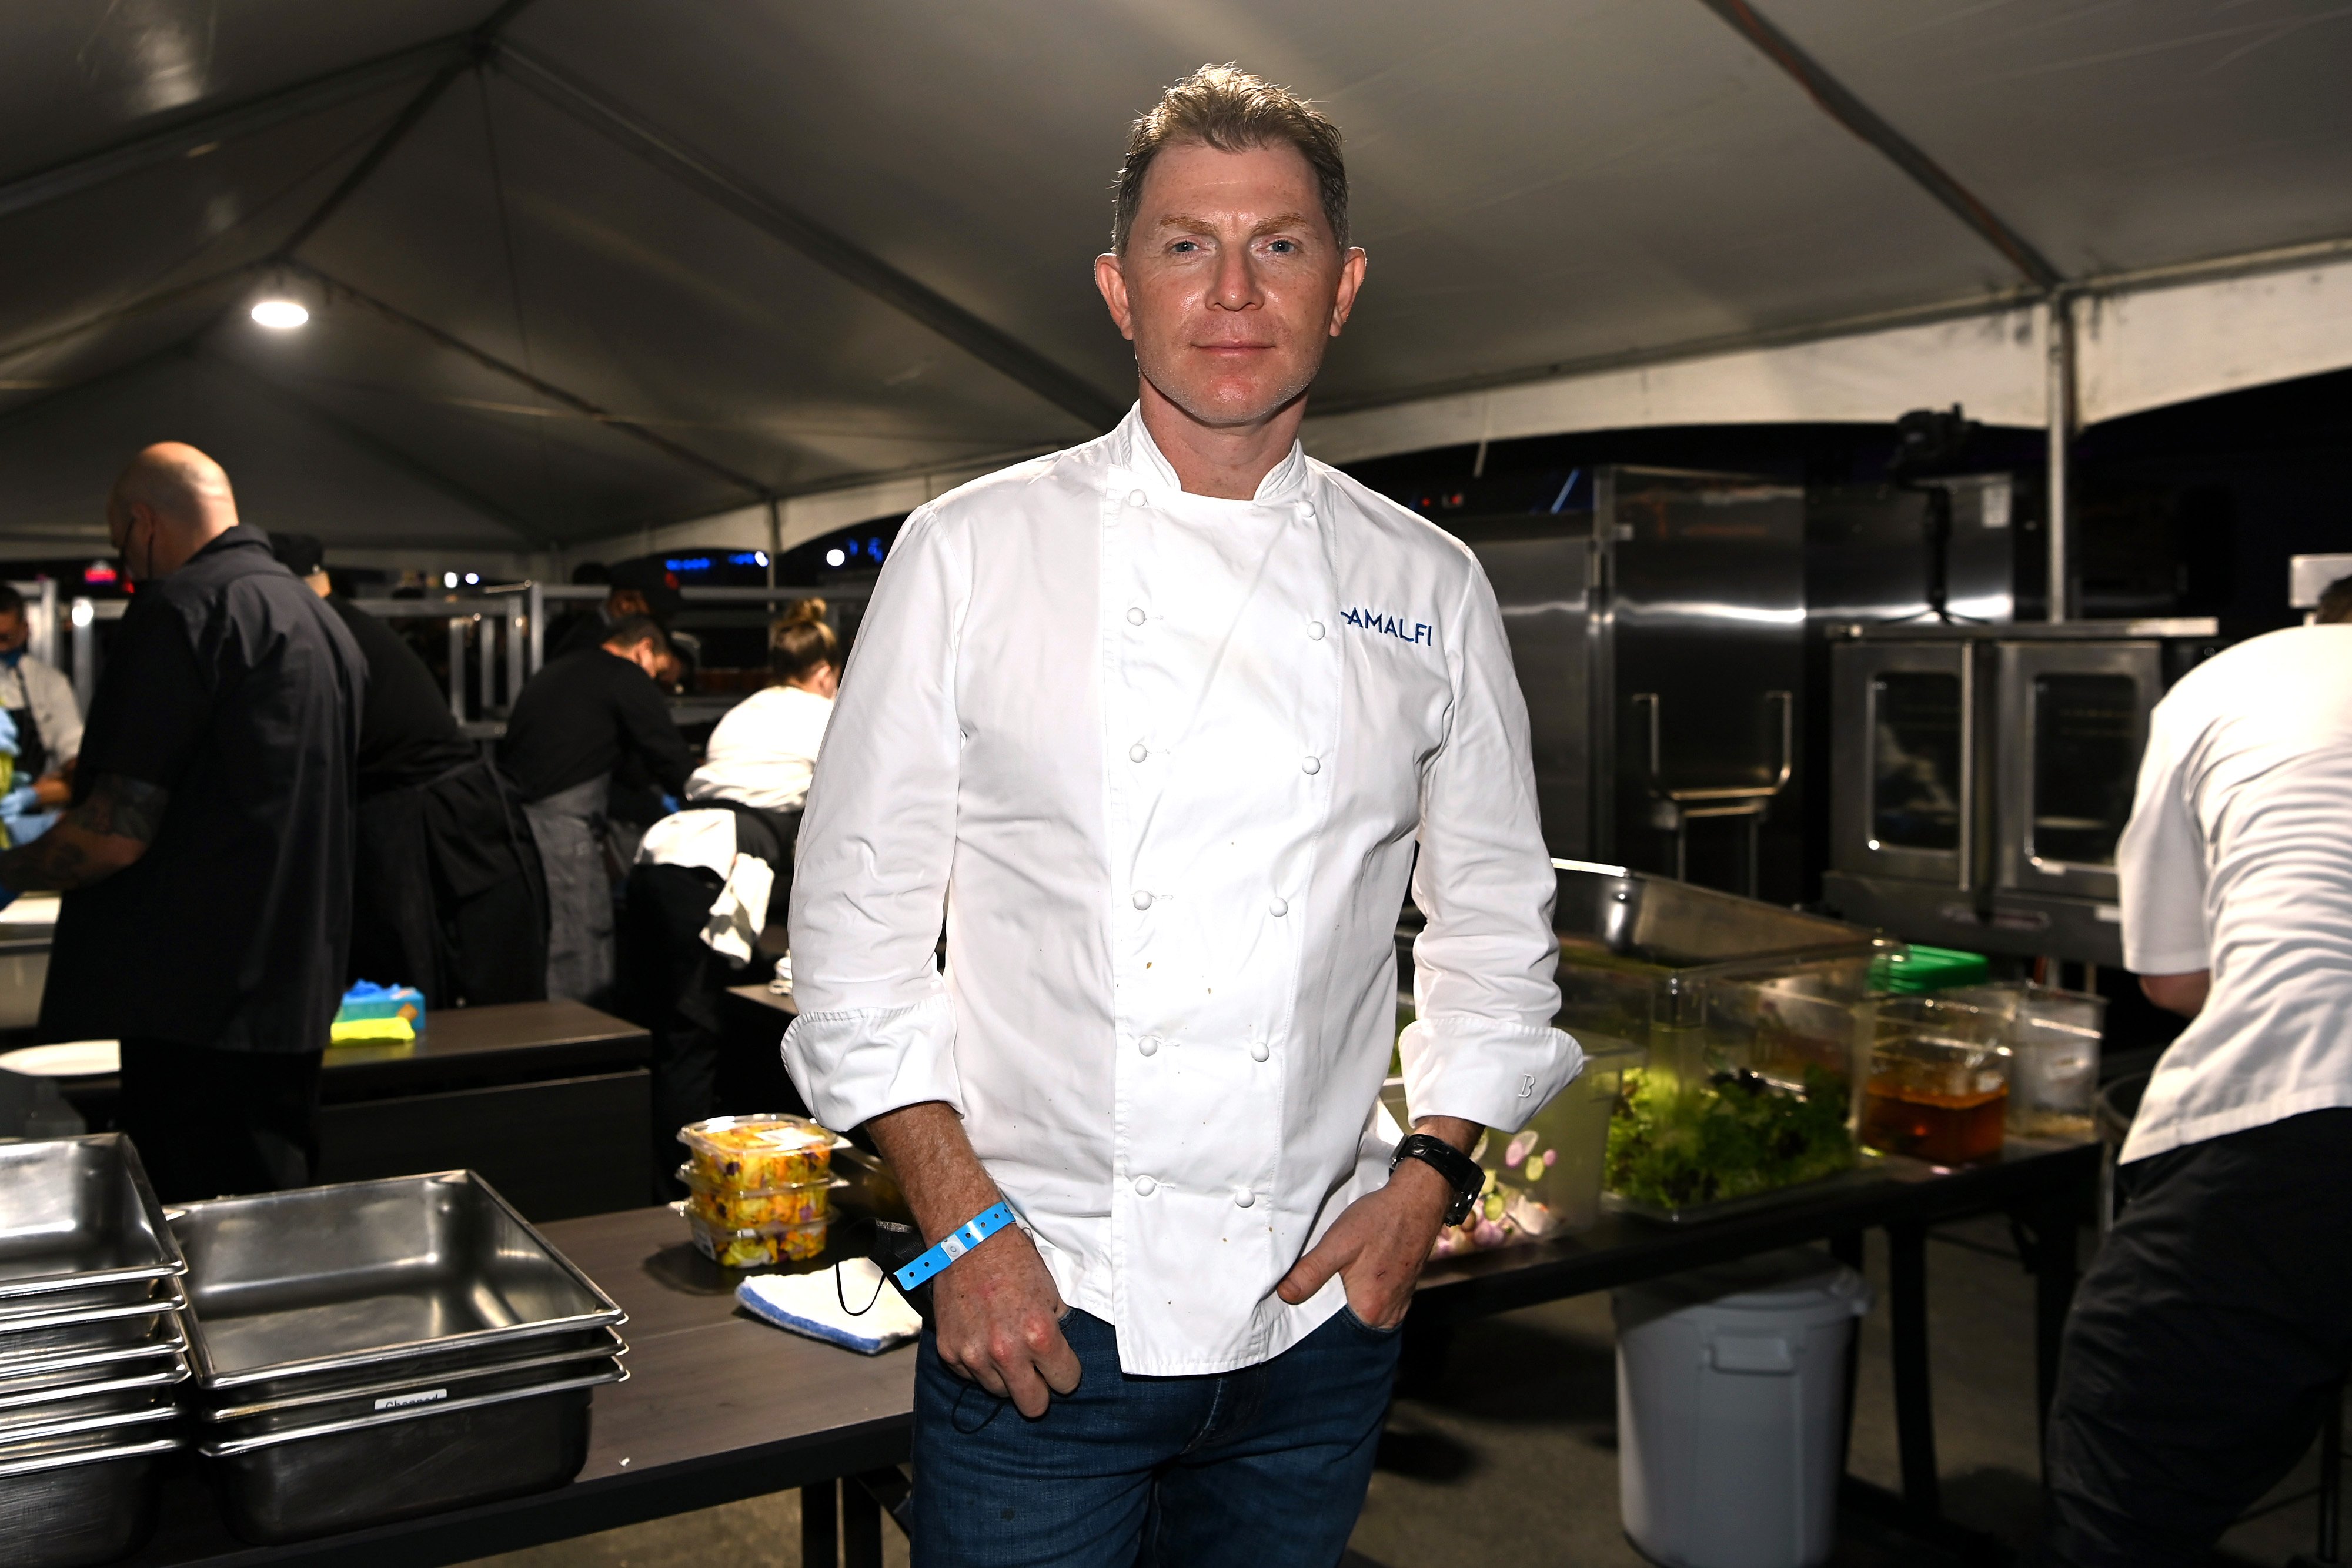 Food Network star Bobby Flay is photographed in his chef's uniform.